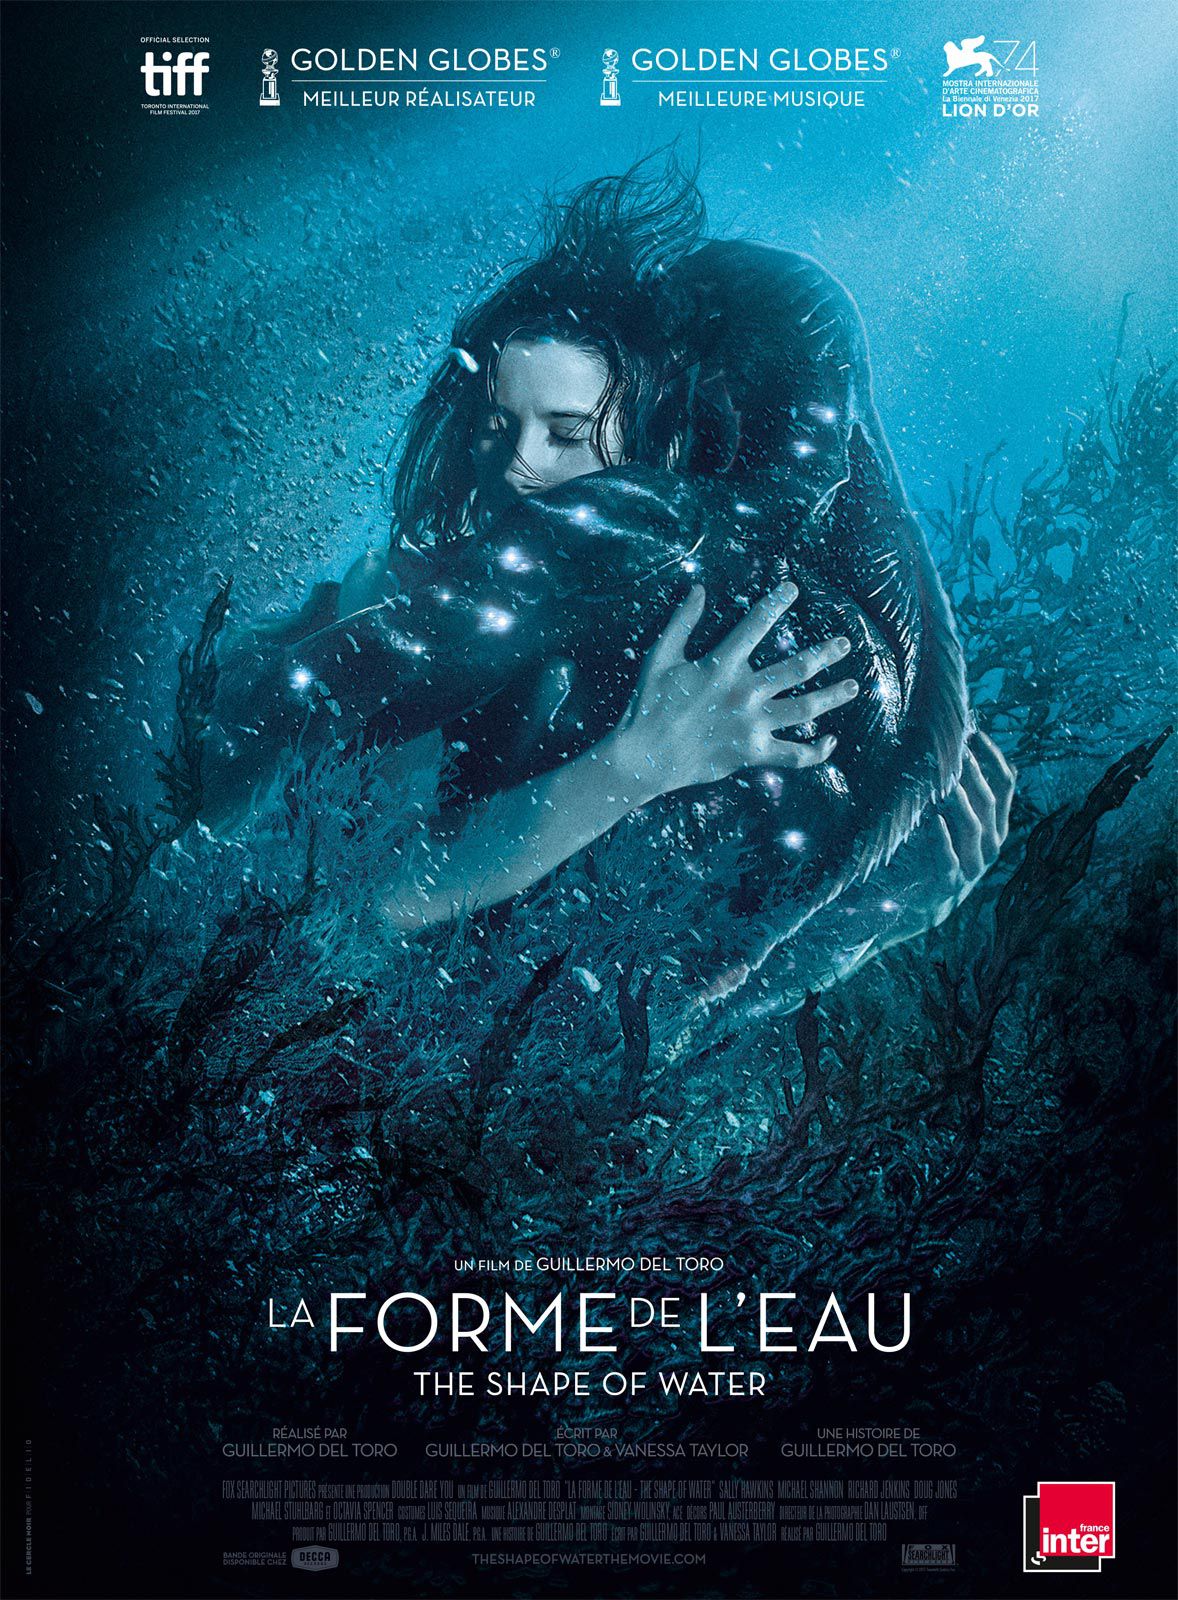 The Shape of Water by Guillermo del Toro